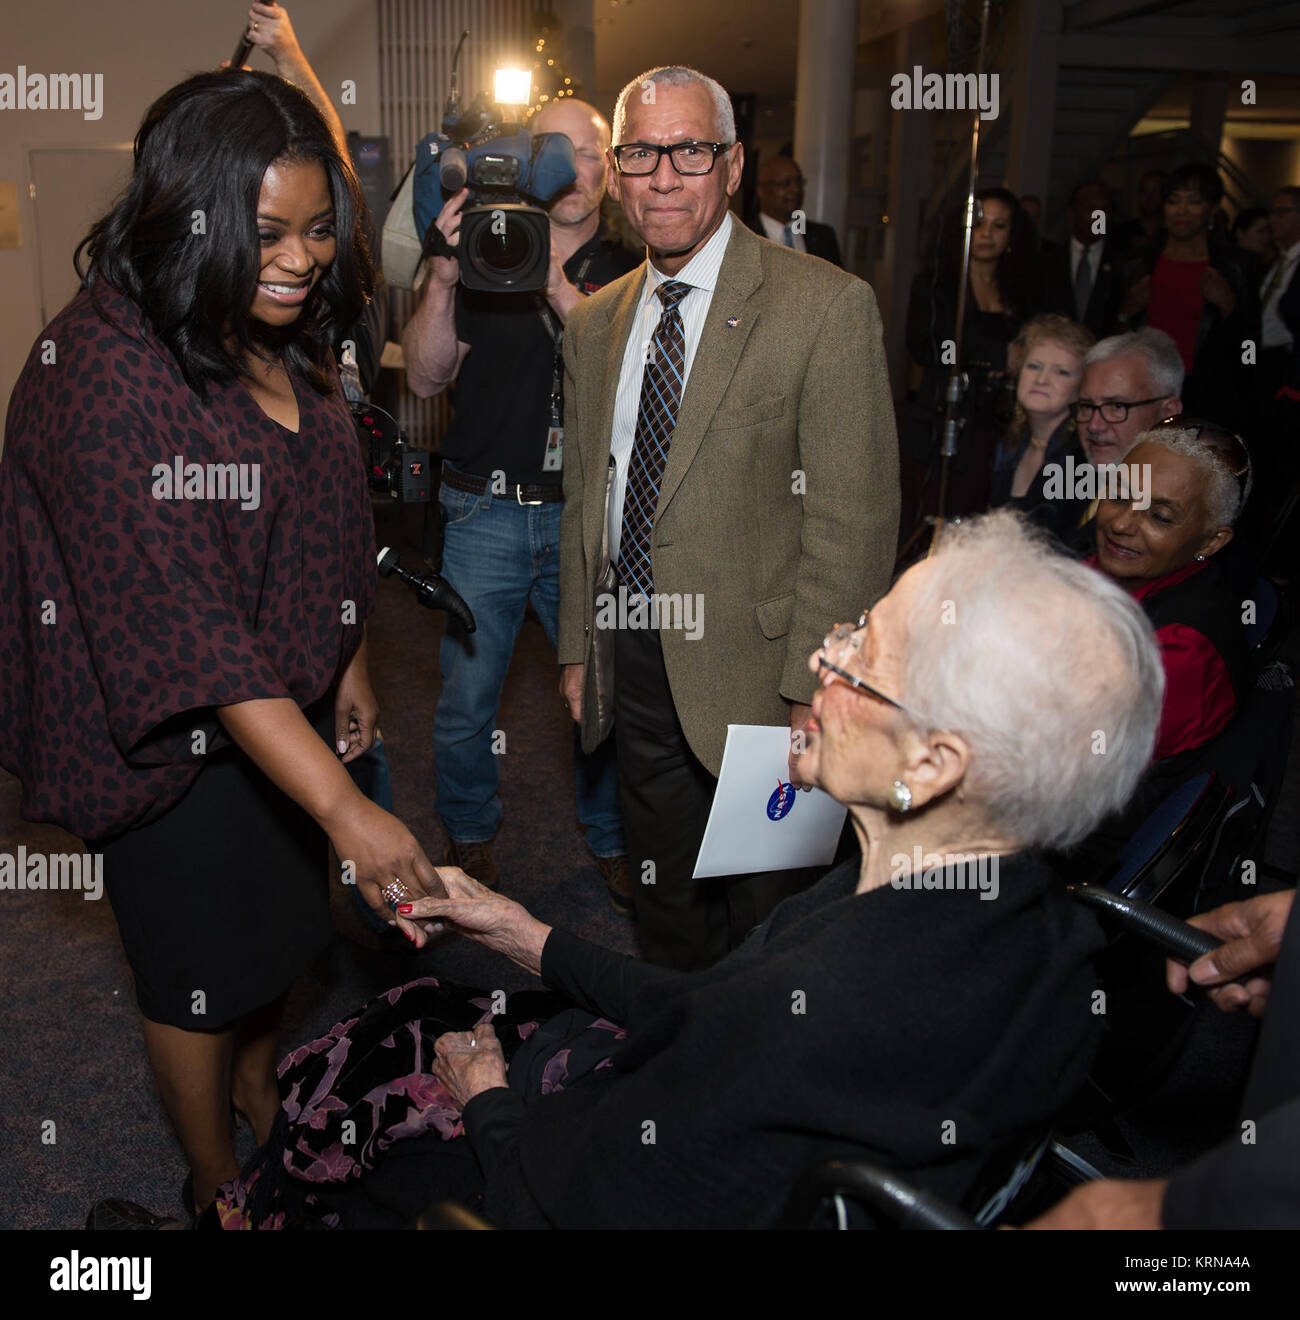 Actress Octavia Spencer, left, who plays Dorothy Vaughan in the film "Hidden Figures" and NASA Administrator Charles Bolden, right, greets NASA "human computer" Katherine Johnson, at a reception to honor NASA's "human computers" on Thursday, Dec. 1, 2016, at the Virginia Air and Space Center in Hampton, VA. Afterward, the guests attended a premiere of "Hidden Figures" a film which stars Taraji P. Henson as Katherine Johnson, the African American mathematician, physicist, and space scientist, who calculated flight trajectories for John Glenn's first orbital flight in 1962. Photo Credit: (NASA/A Stock Photo